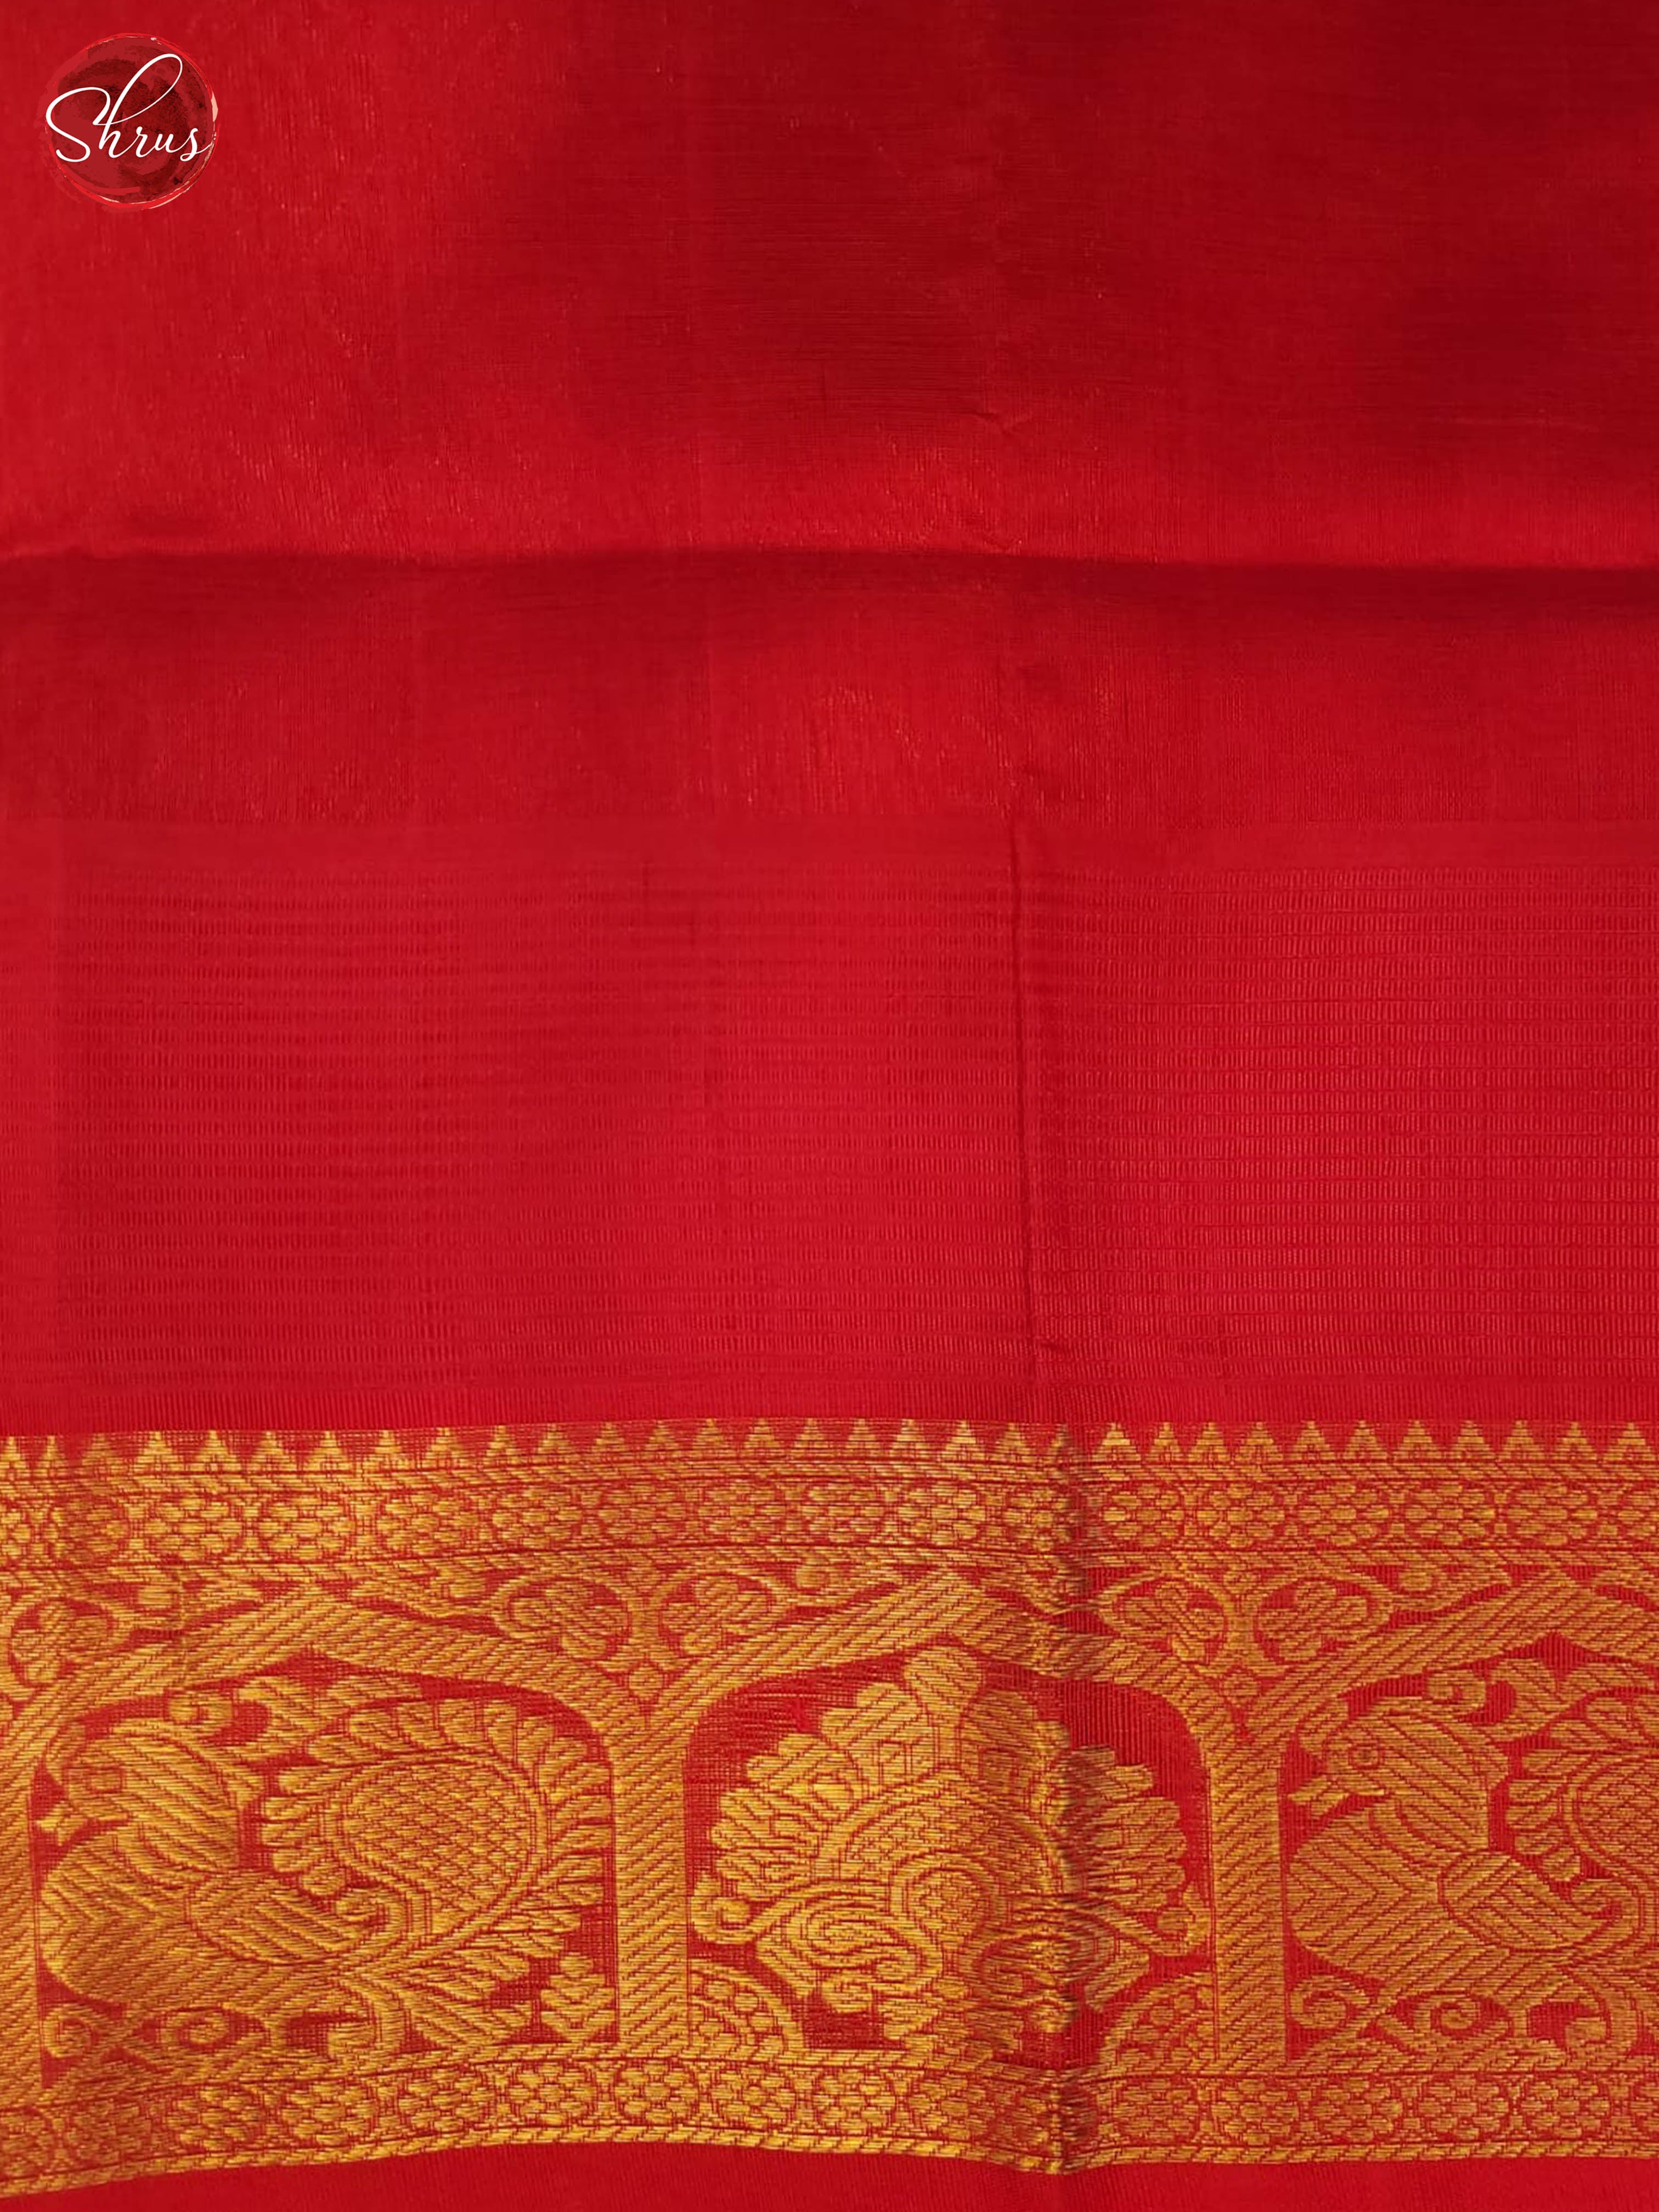 Yellow and Red-Silk Cotton saree - Shop on ShrusEternity.com